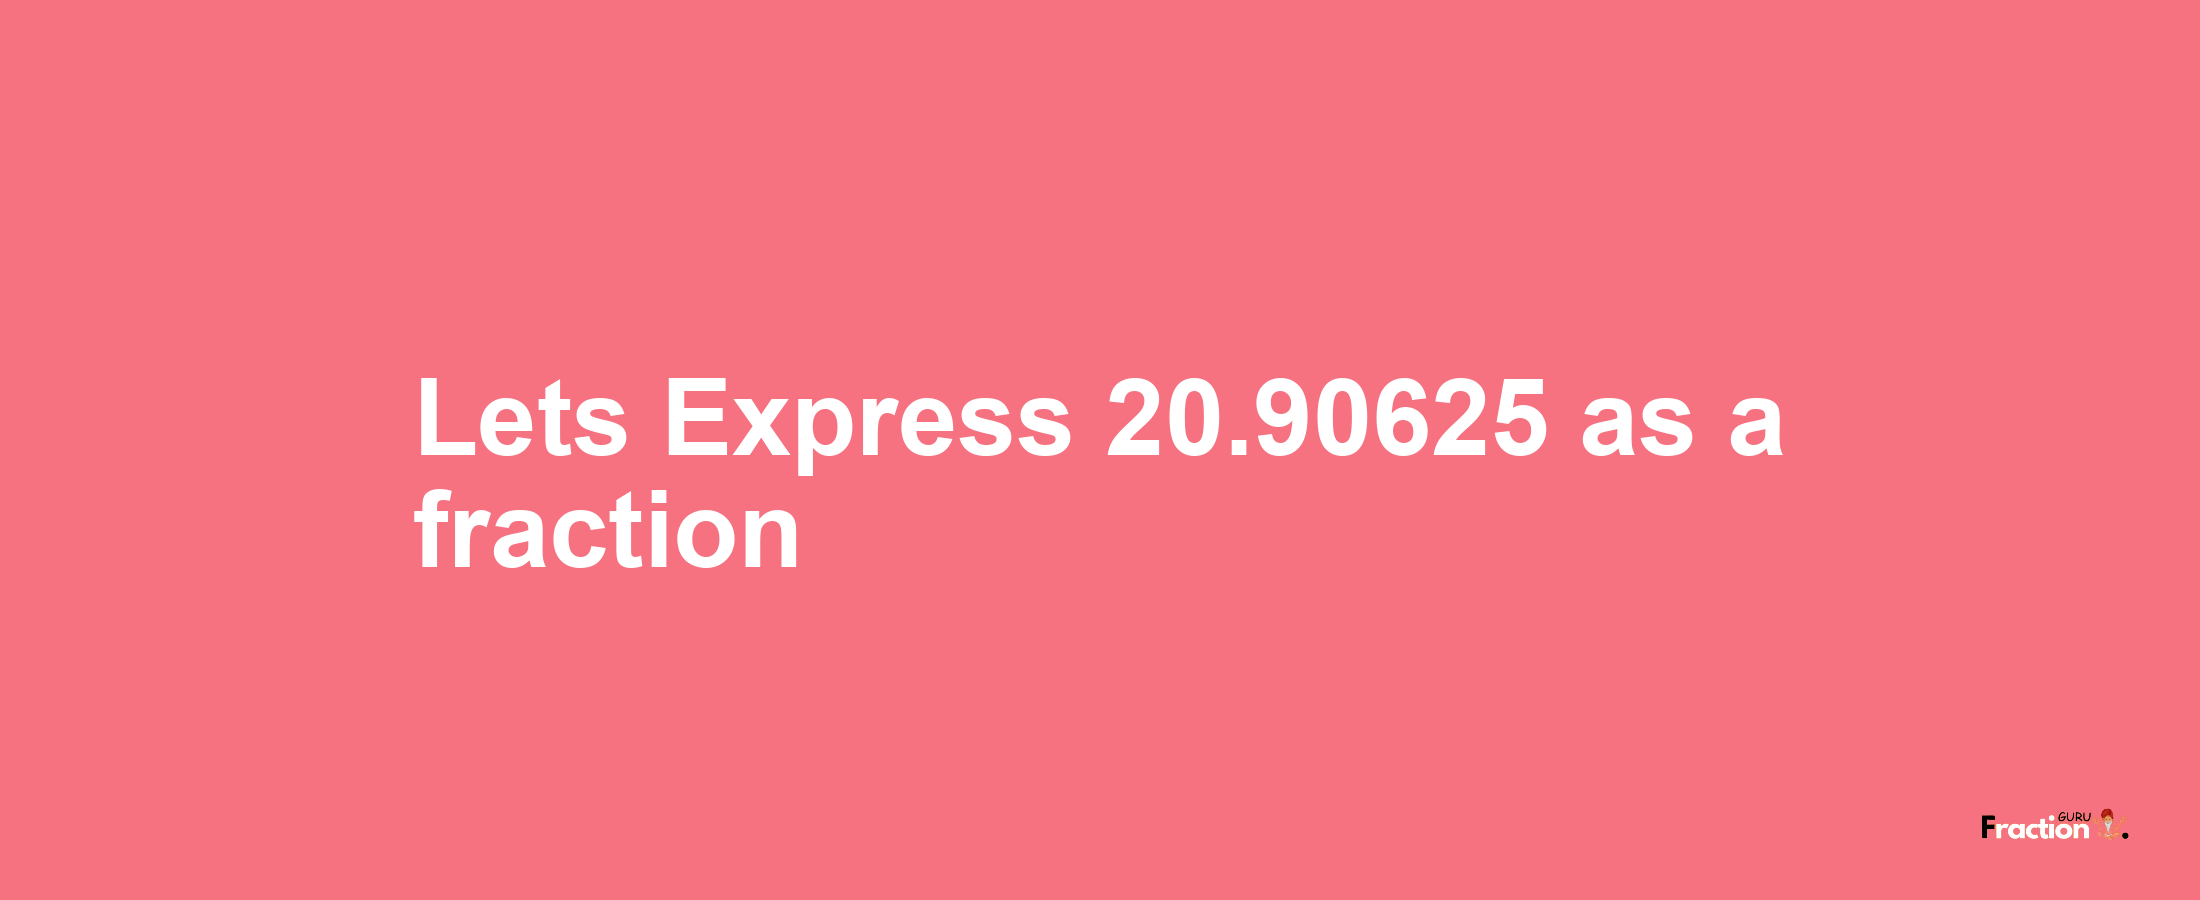 Lets Express 20.90625 as afraction